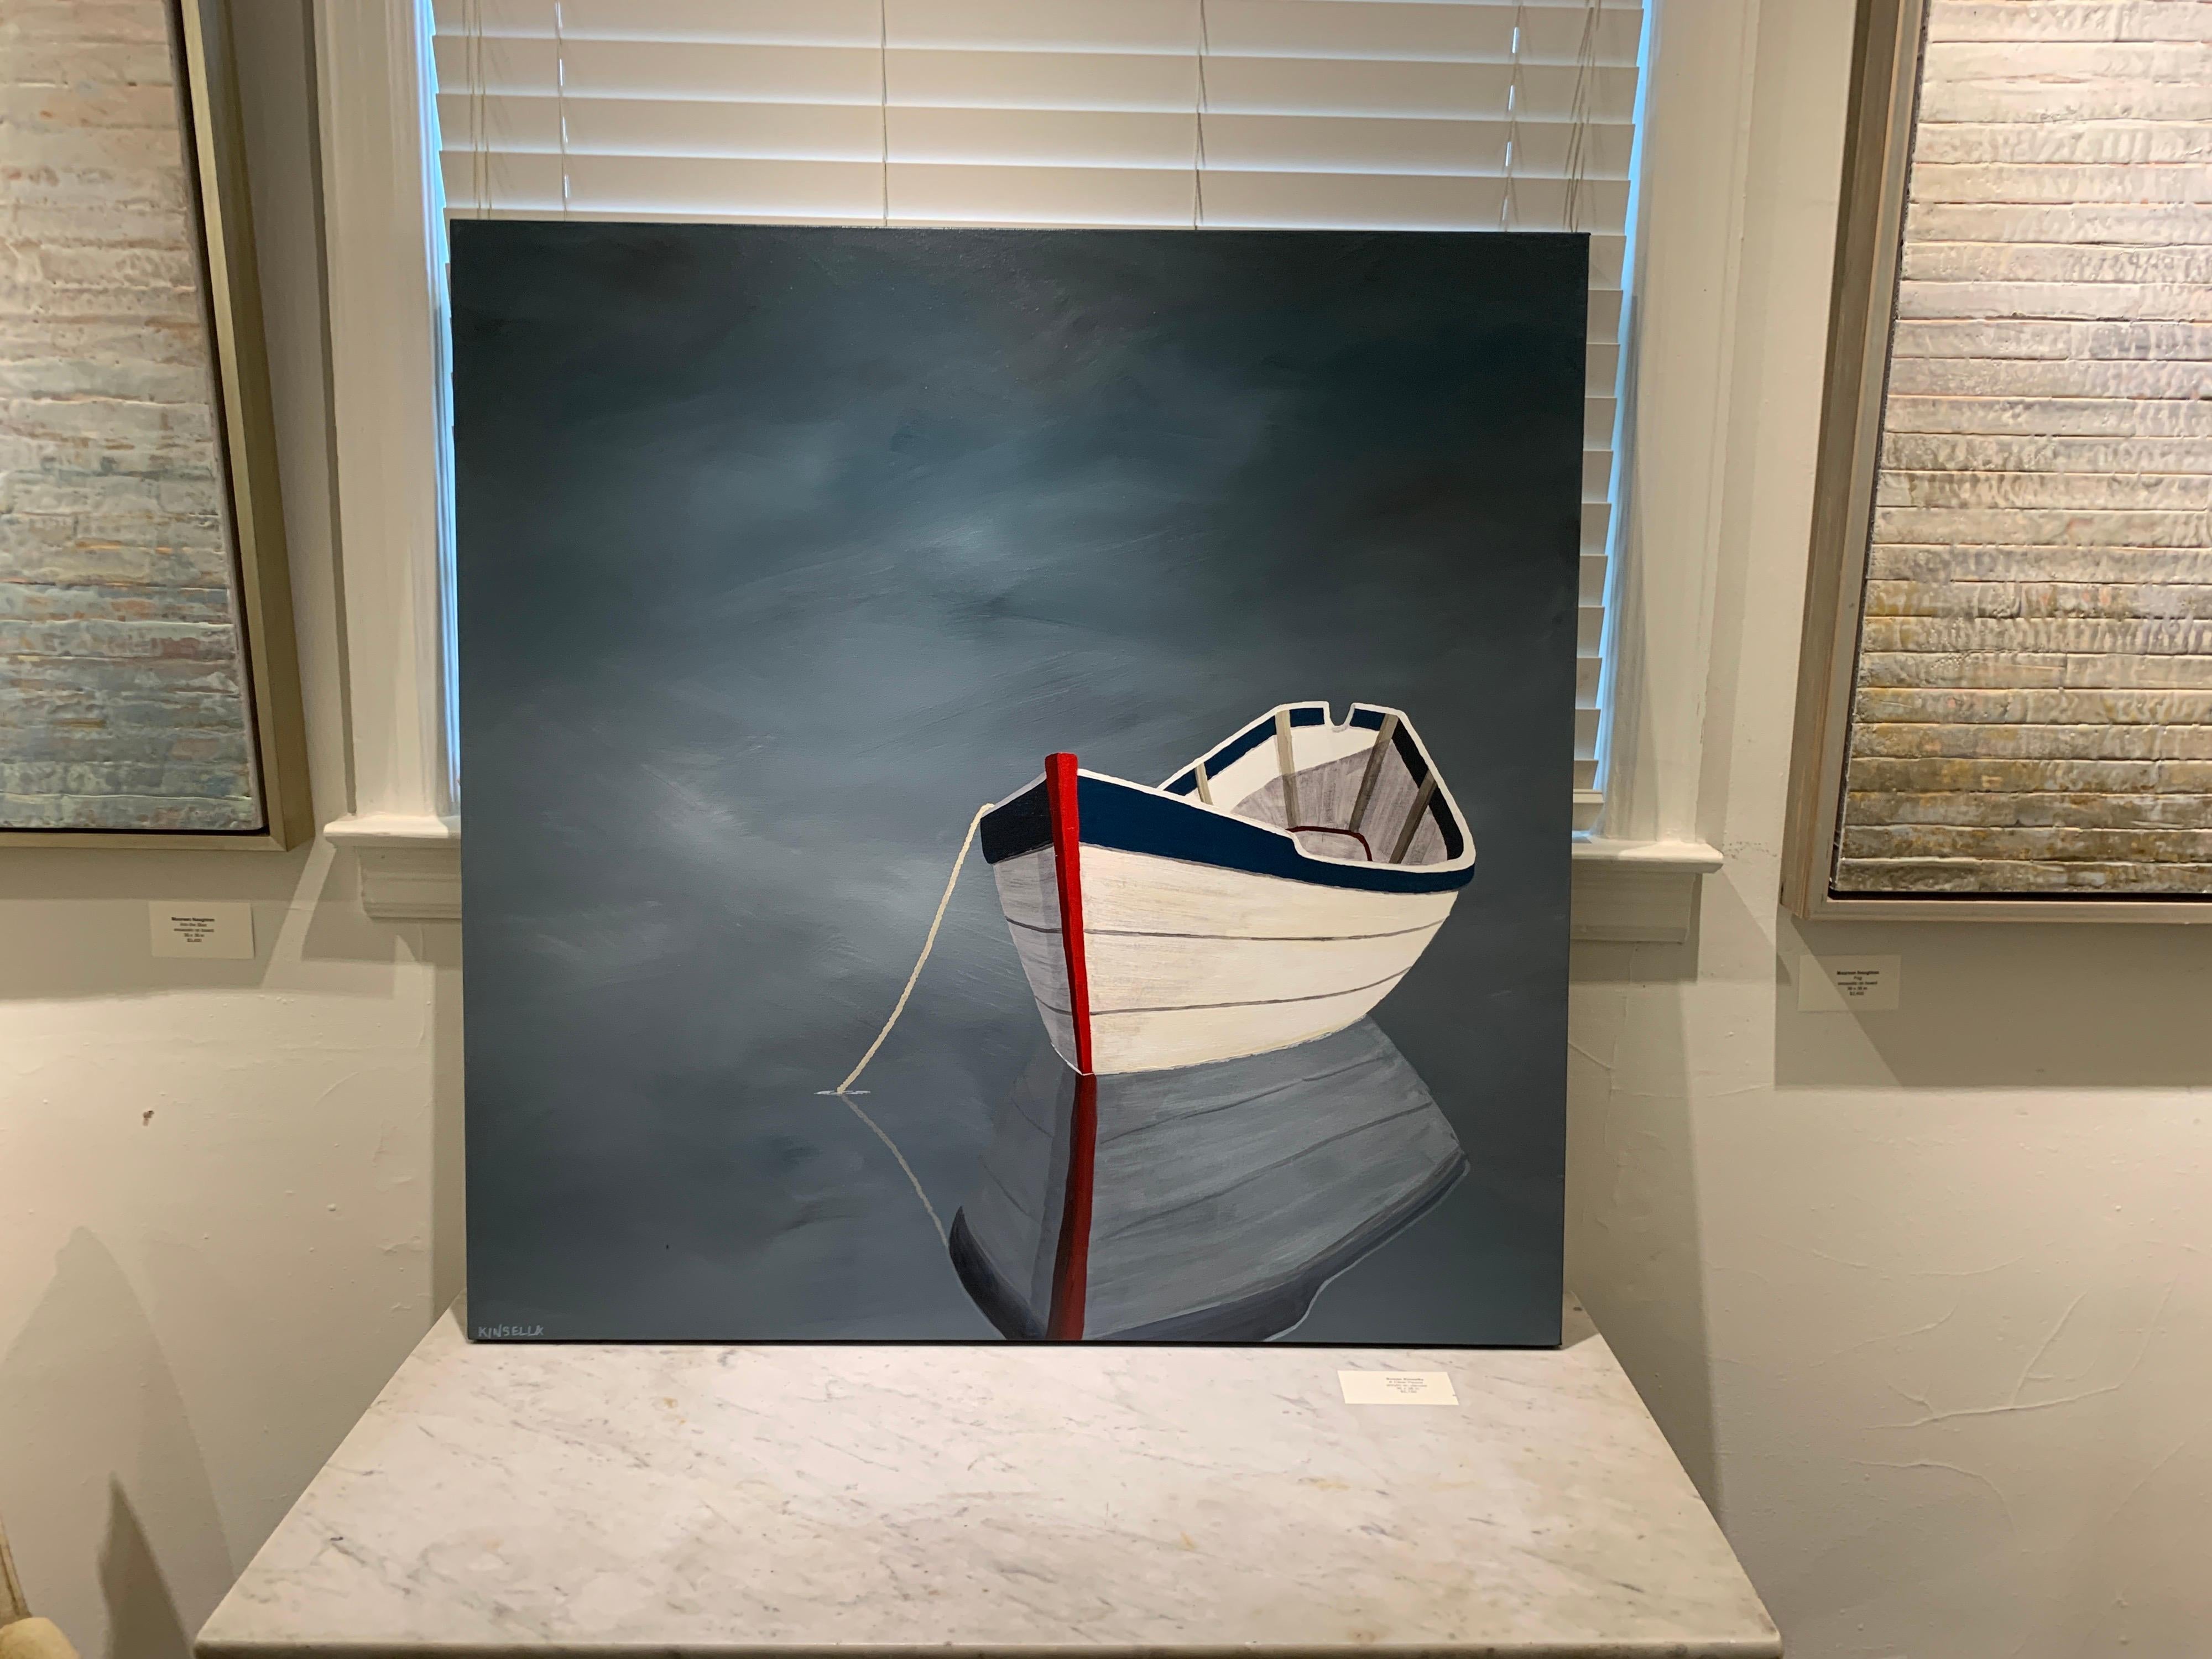 A Clear Peace Susan Kinsella, Square Nautical Acrylic on Canvas Painting 2